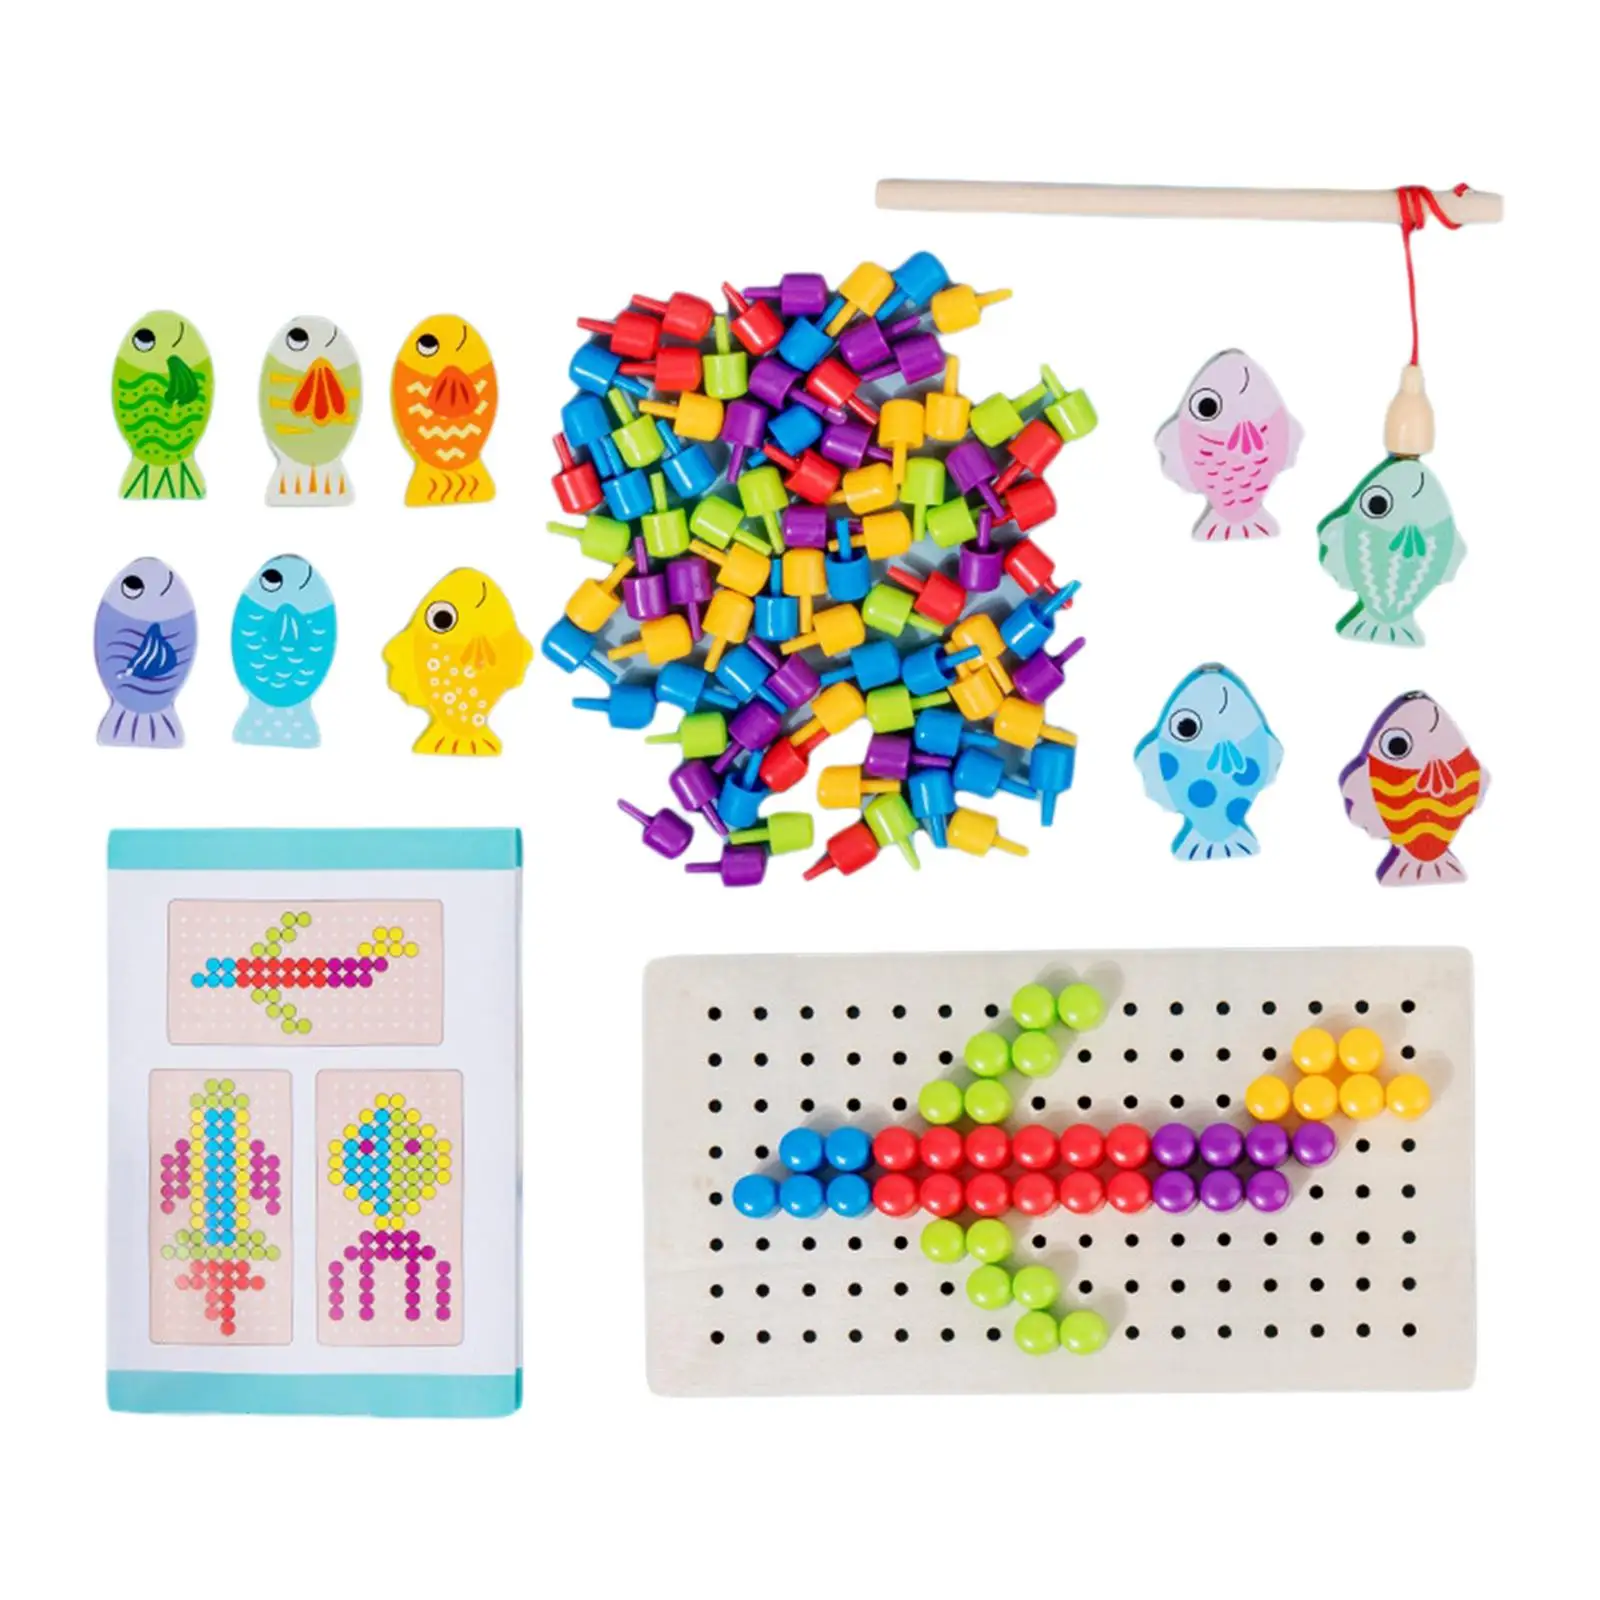 Fishing Toys Party Game Toy Novelty Preschool Learning Educational Toy Fishing Board Game for Kids Toddlers Girls Children Boys